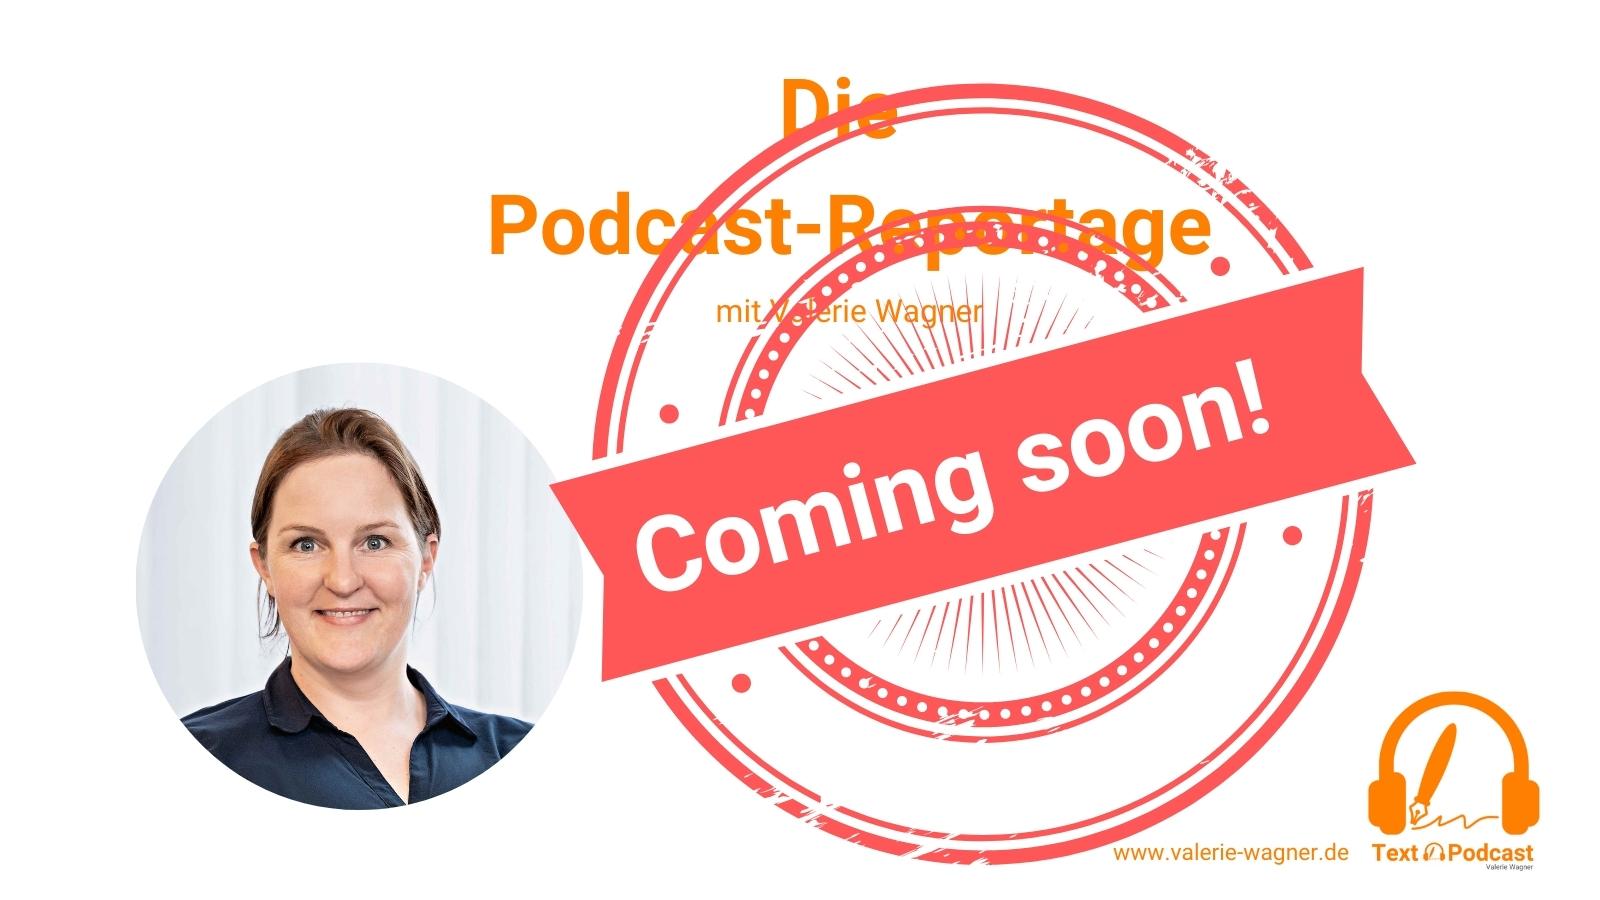 Coming soon – Die Podcast-Reportage